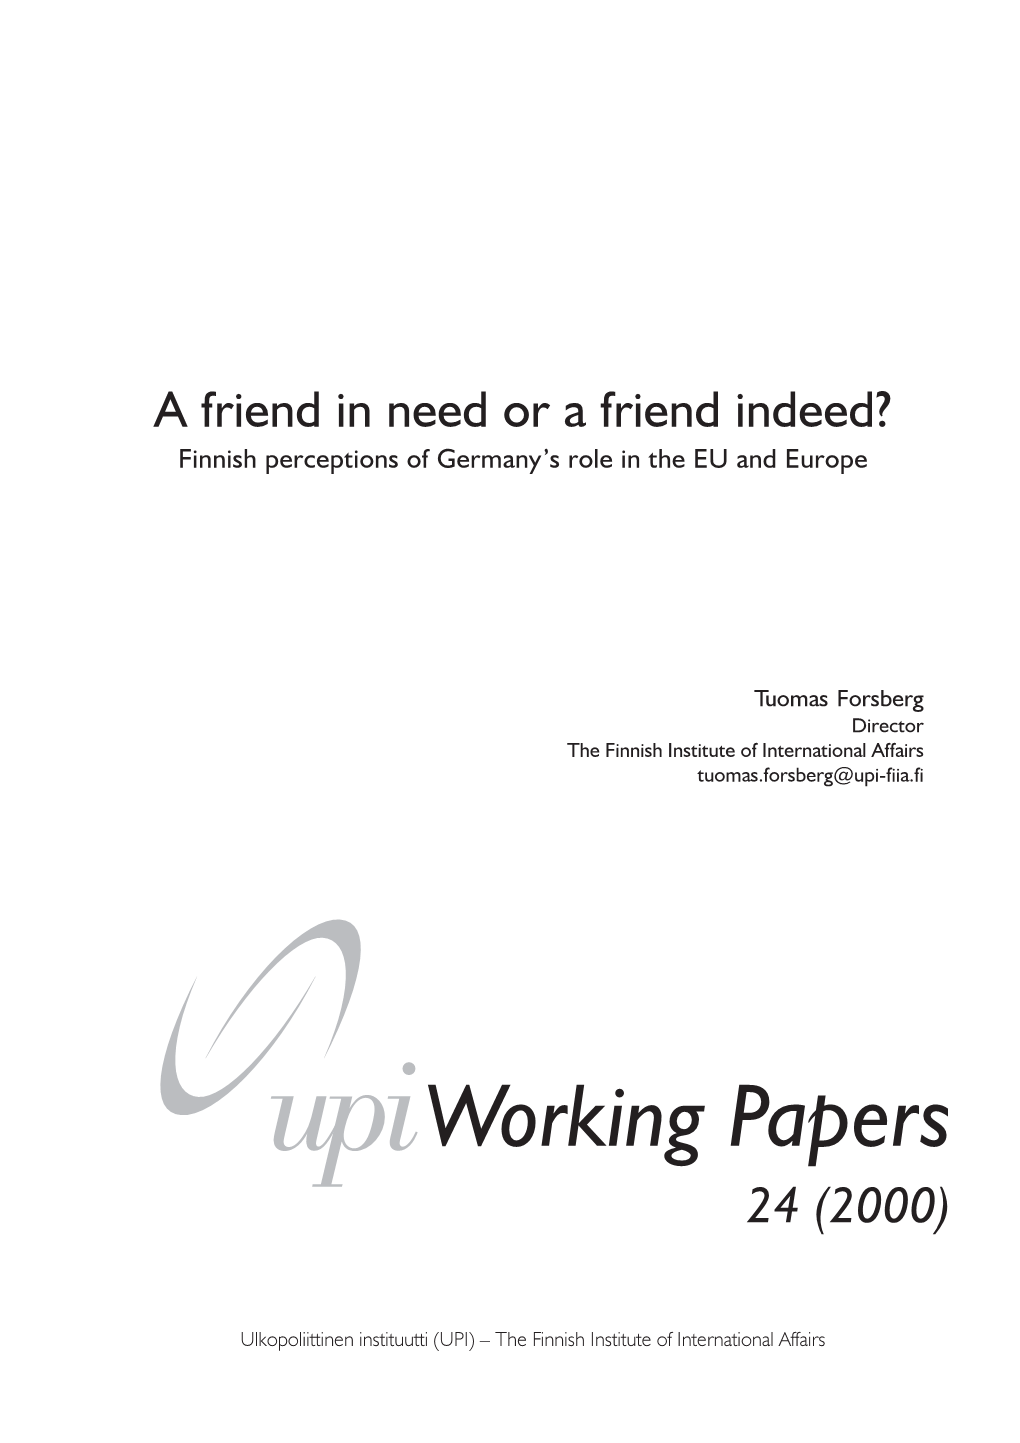 Working Papers 24 (2000)